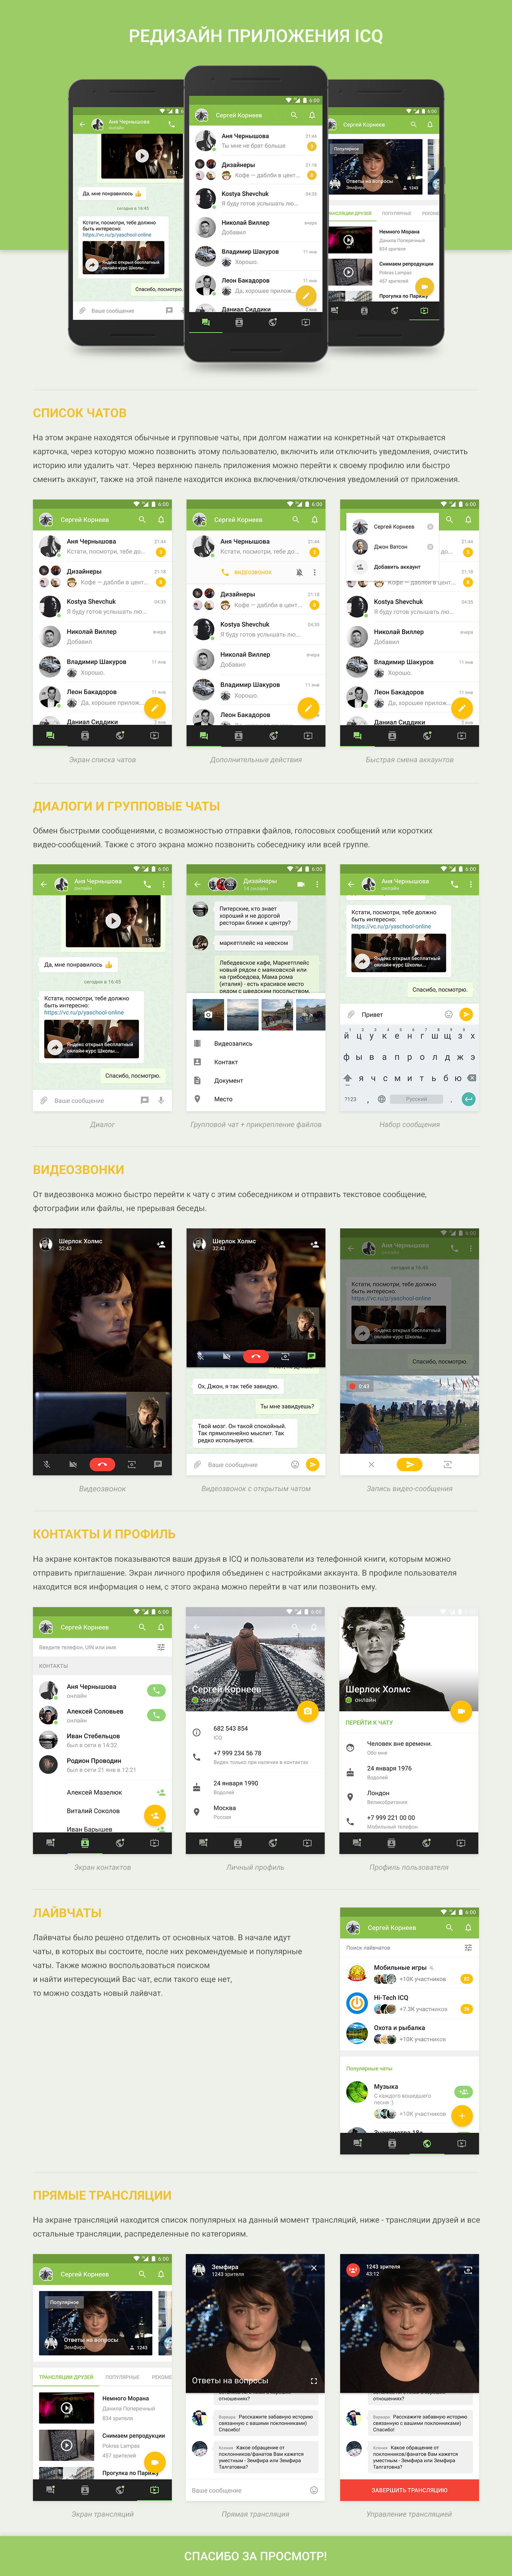 ICQ android redesign app material design mobile concept UI ux Interface messenger